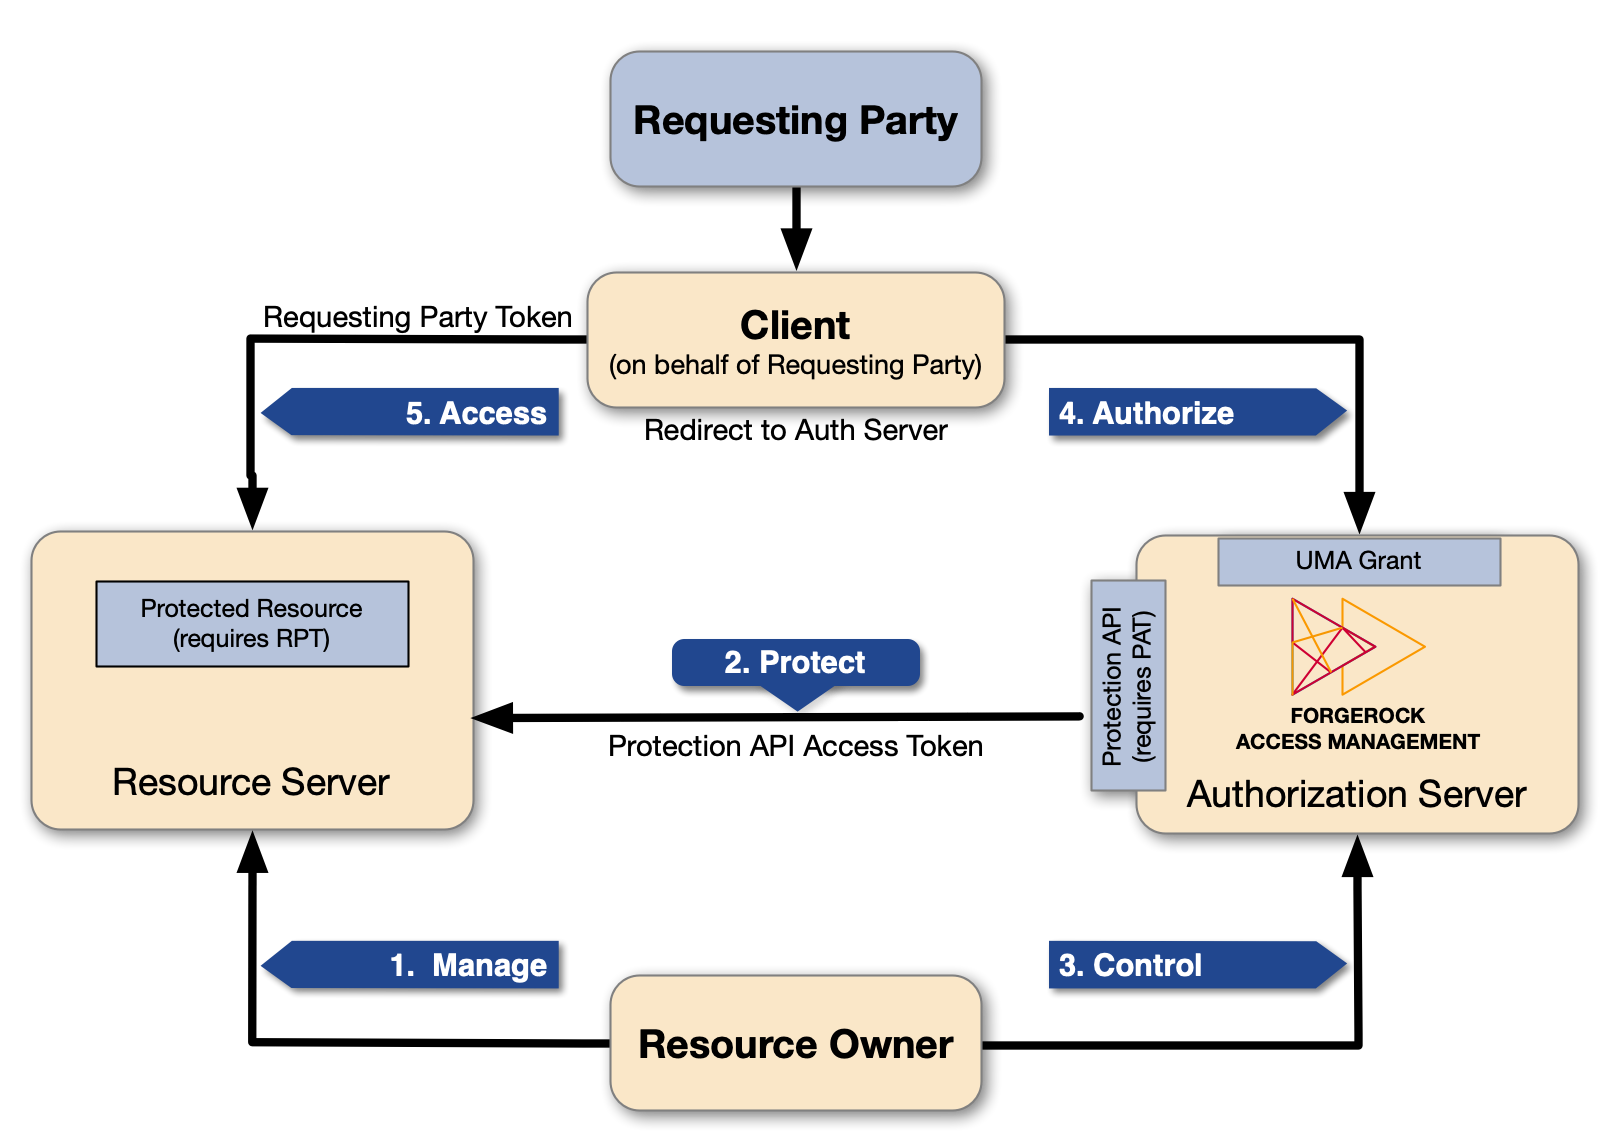 AM acts as the Authorization Server in the UMA workflow.